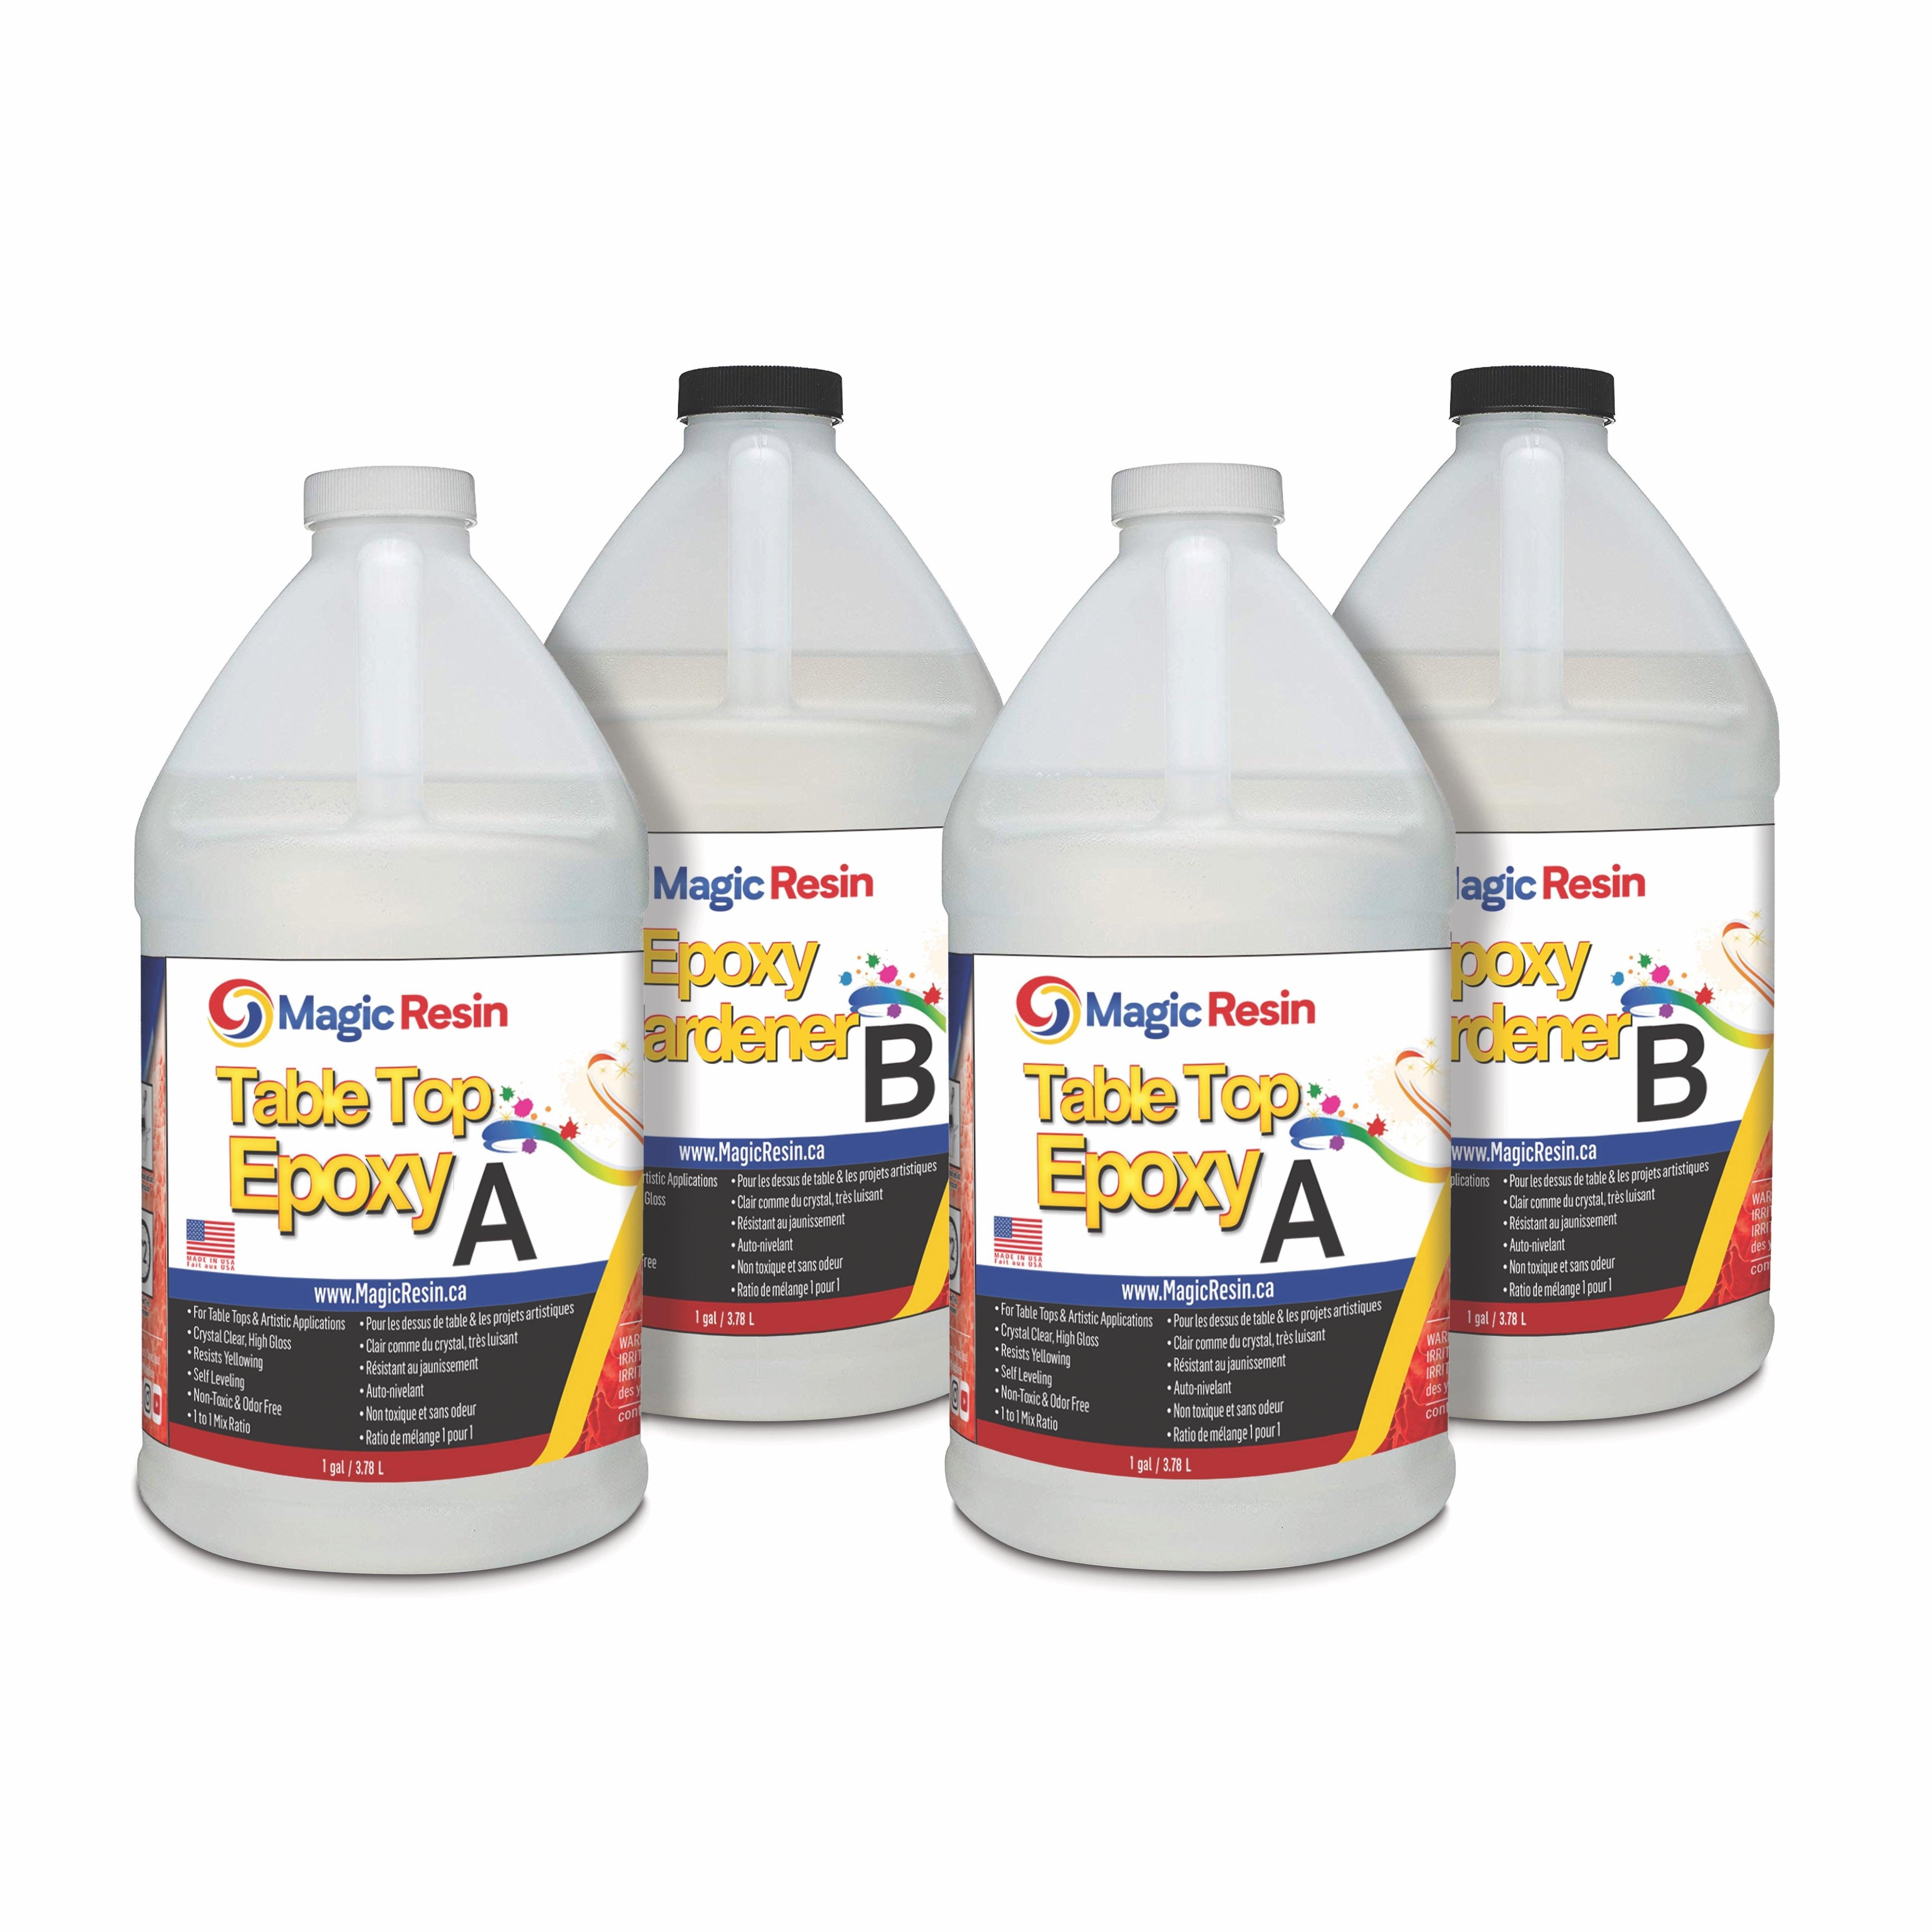 4 Gallon, Table Top & Art Clear Coating Epoxy Resin Kit